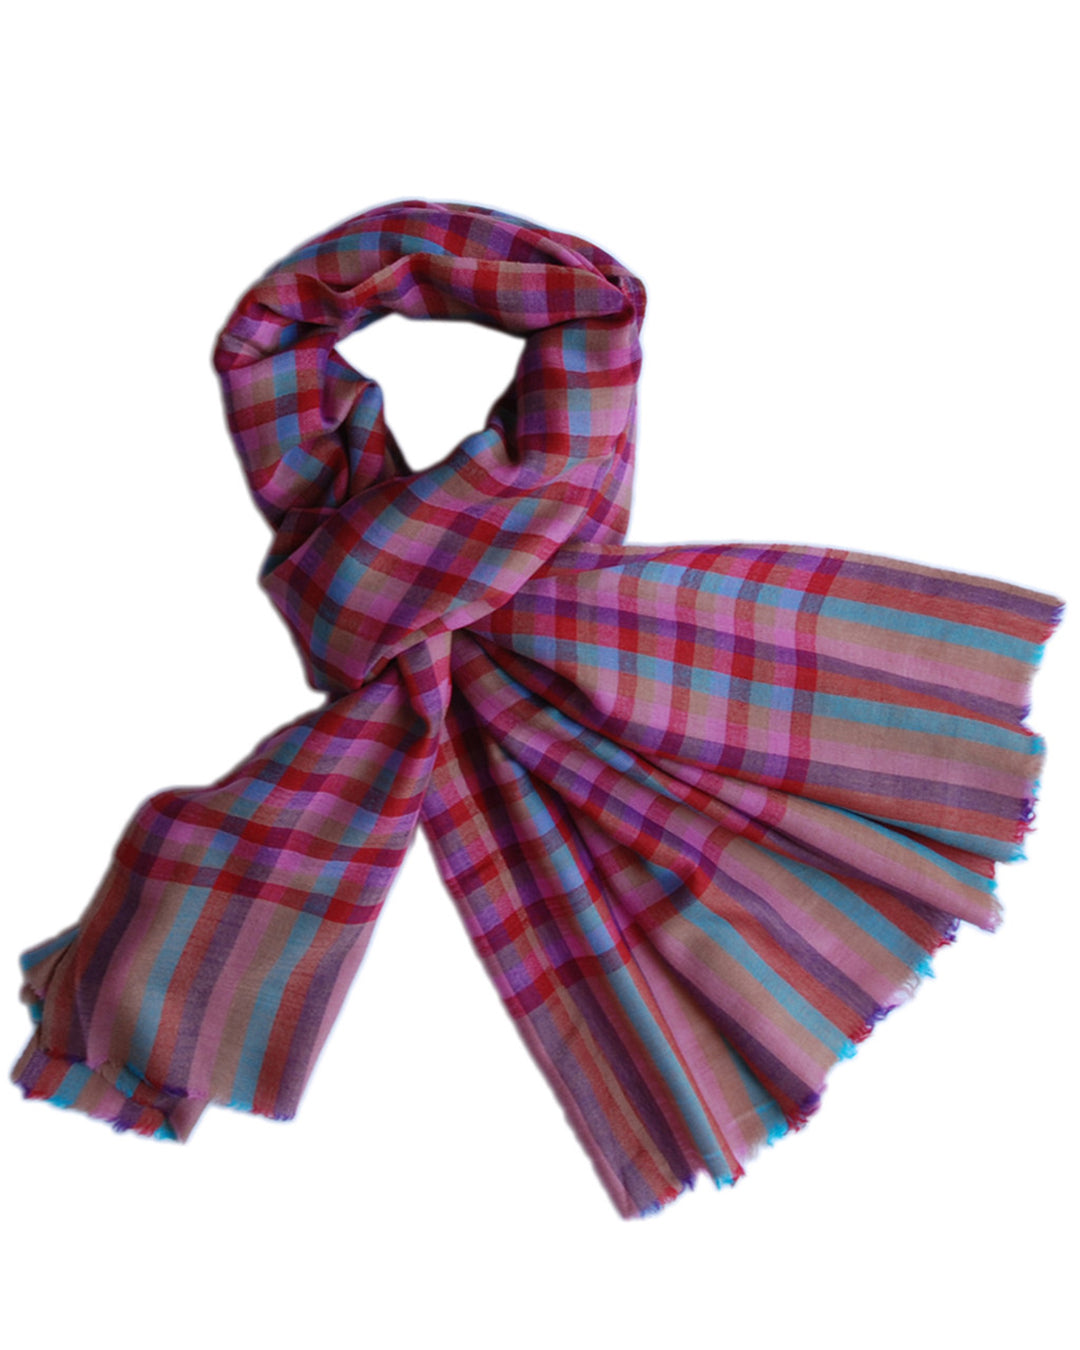 Pure Cashmere Scarf - Red Pink Blue Gingham